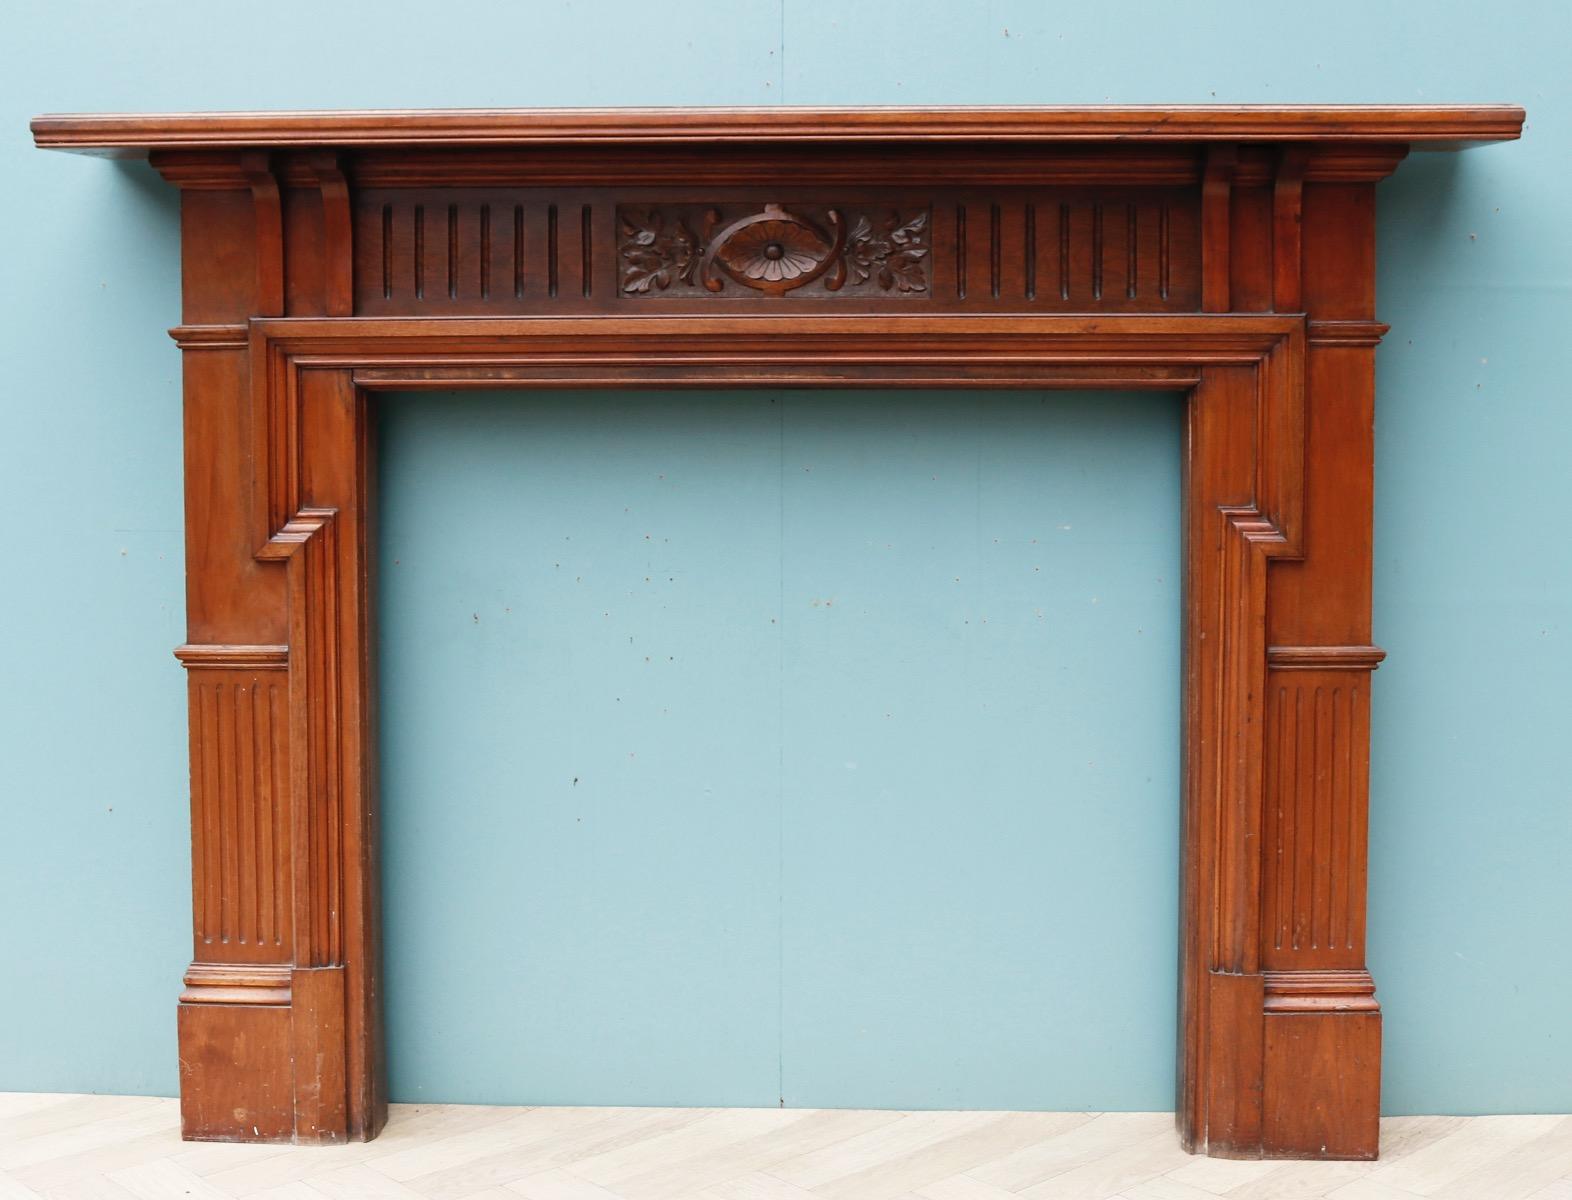 A walnut fire surround with carved frieze panel.

Additional dimensions 

Opening height 96.5 cm

Opening width 103.5 cm

Width between outsides of the foot blocks 153 cm.